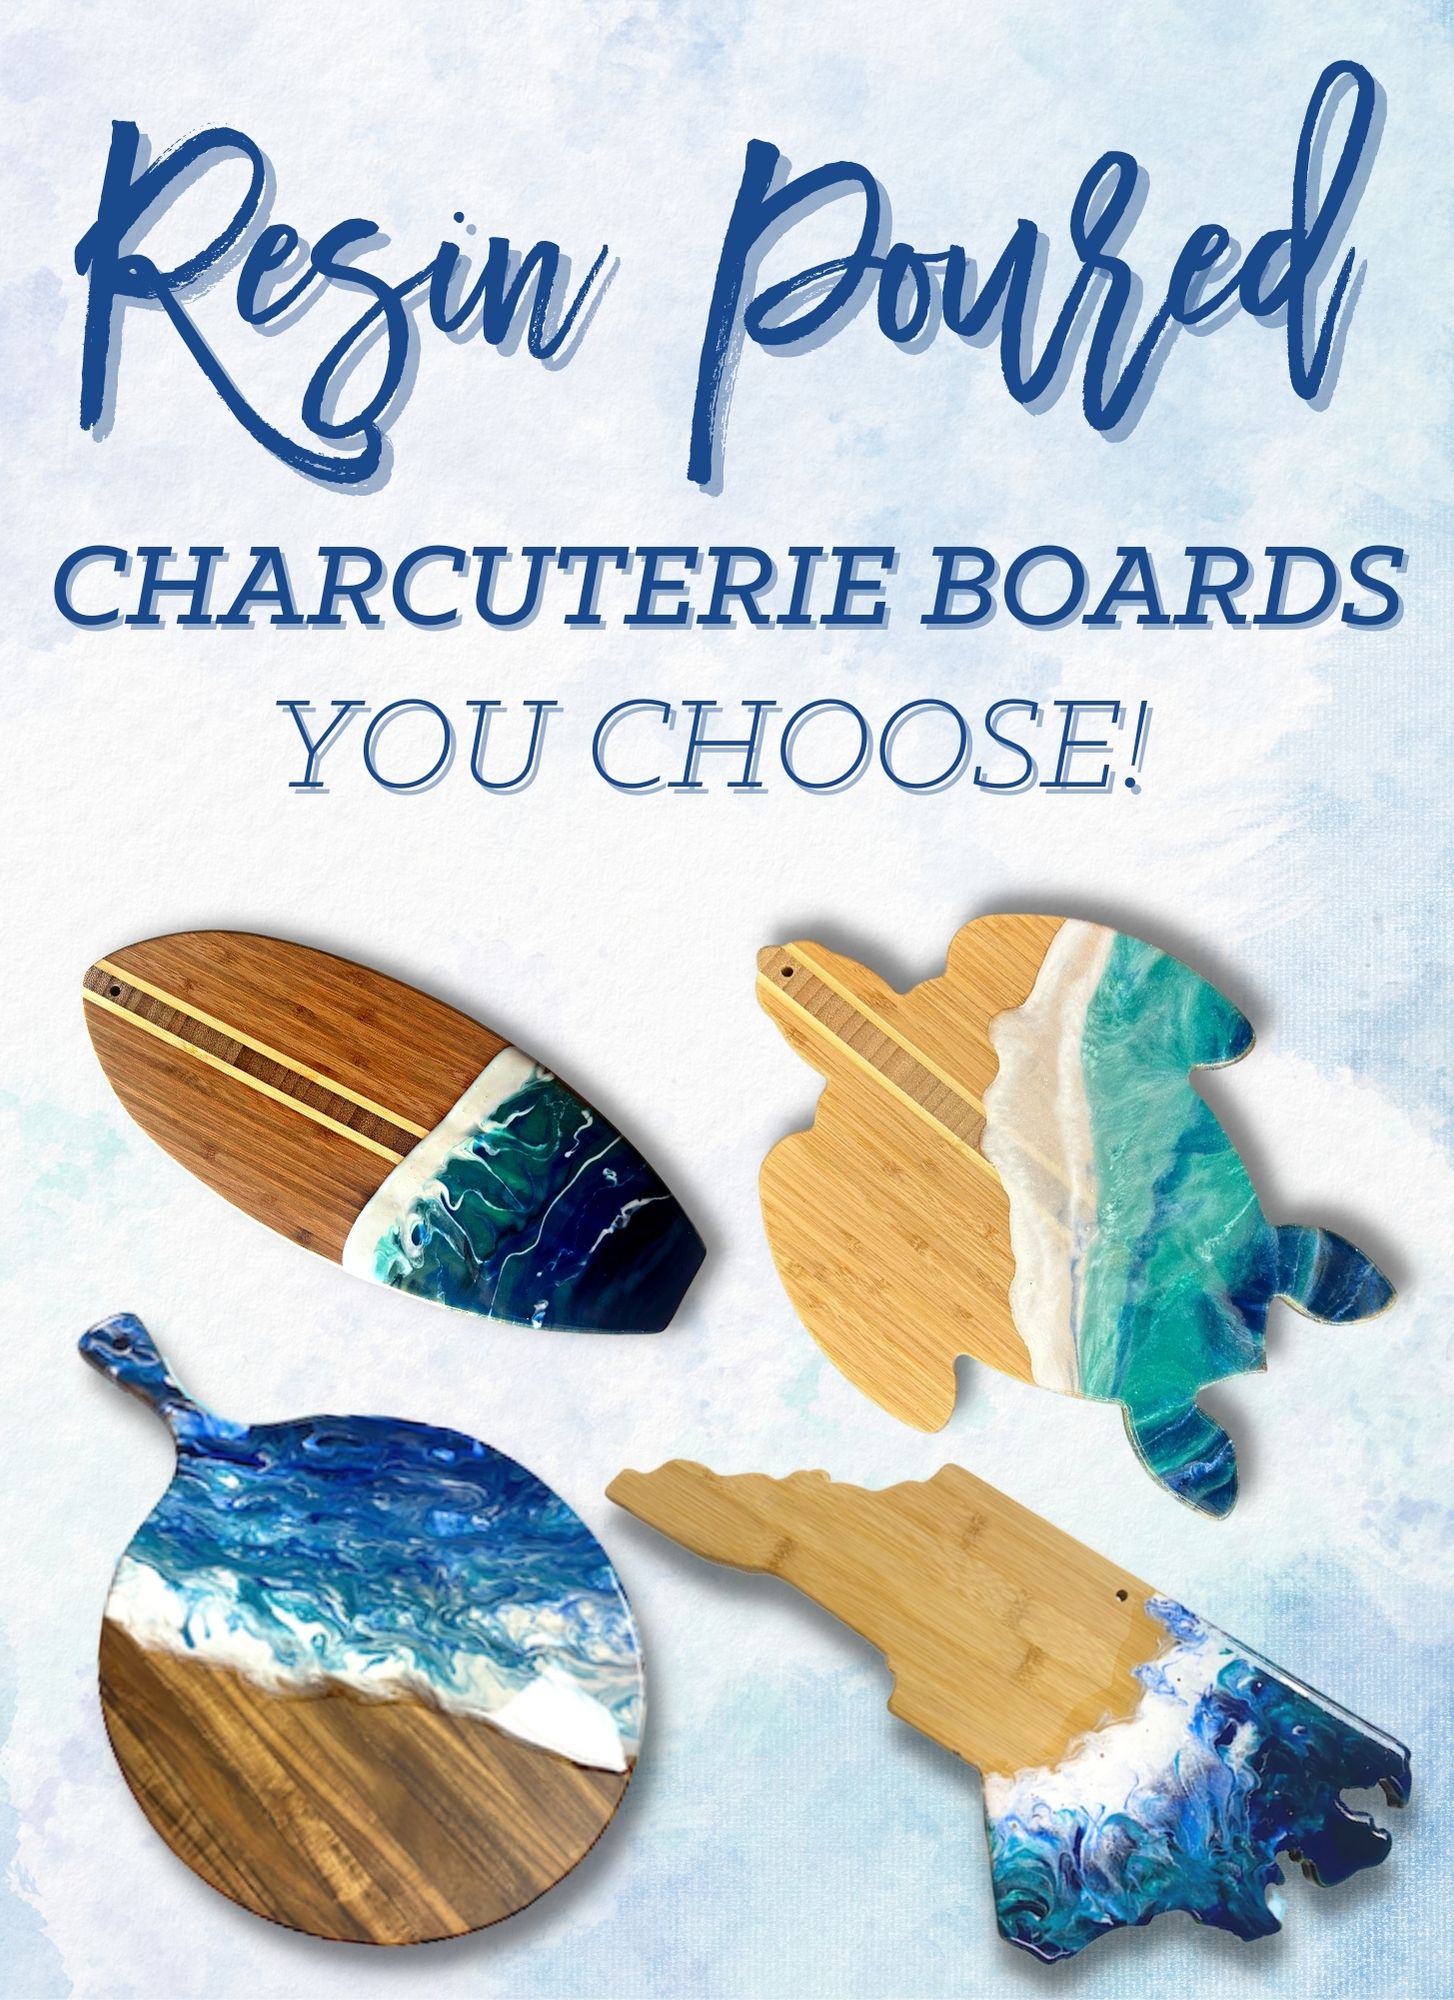 Resin Poured Charcuterie Boards